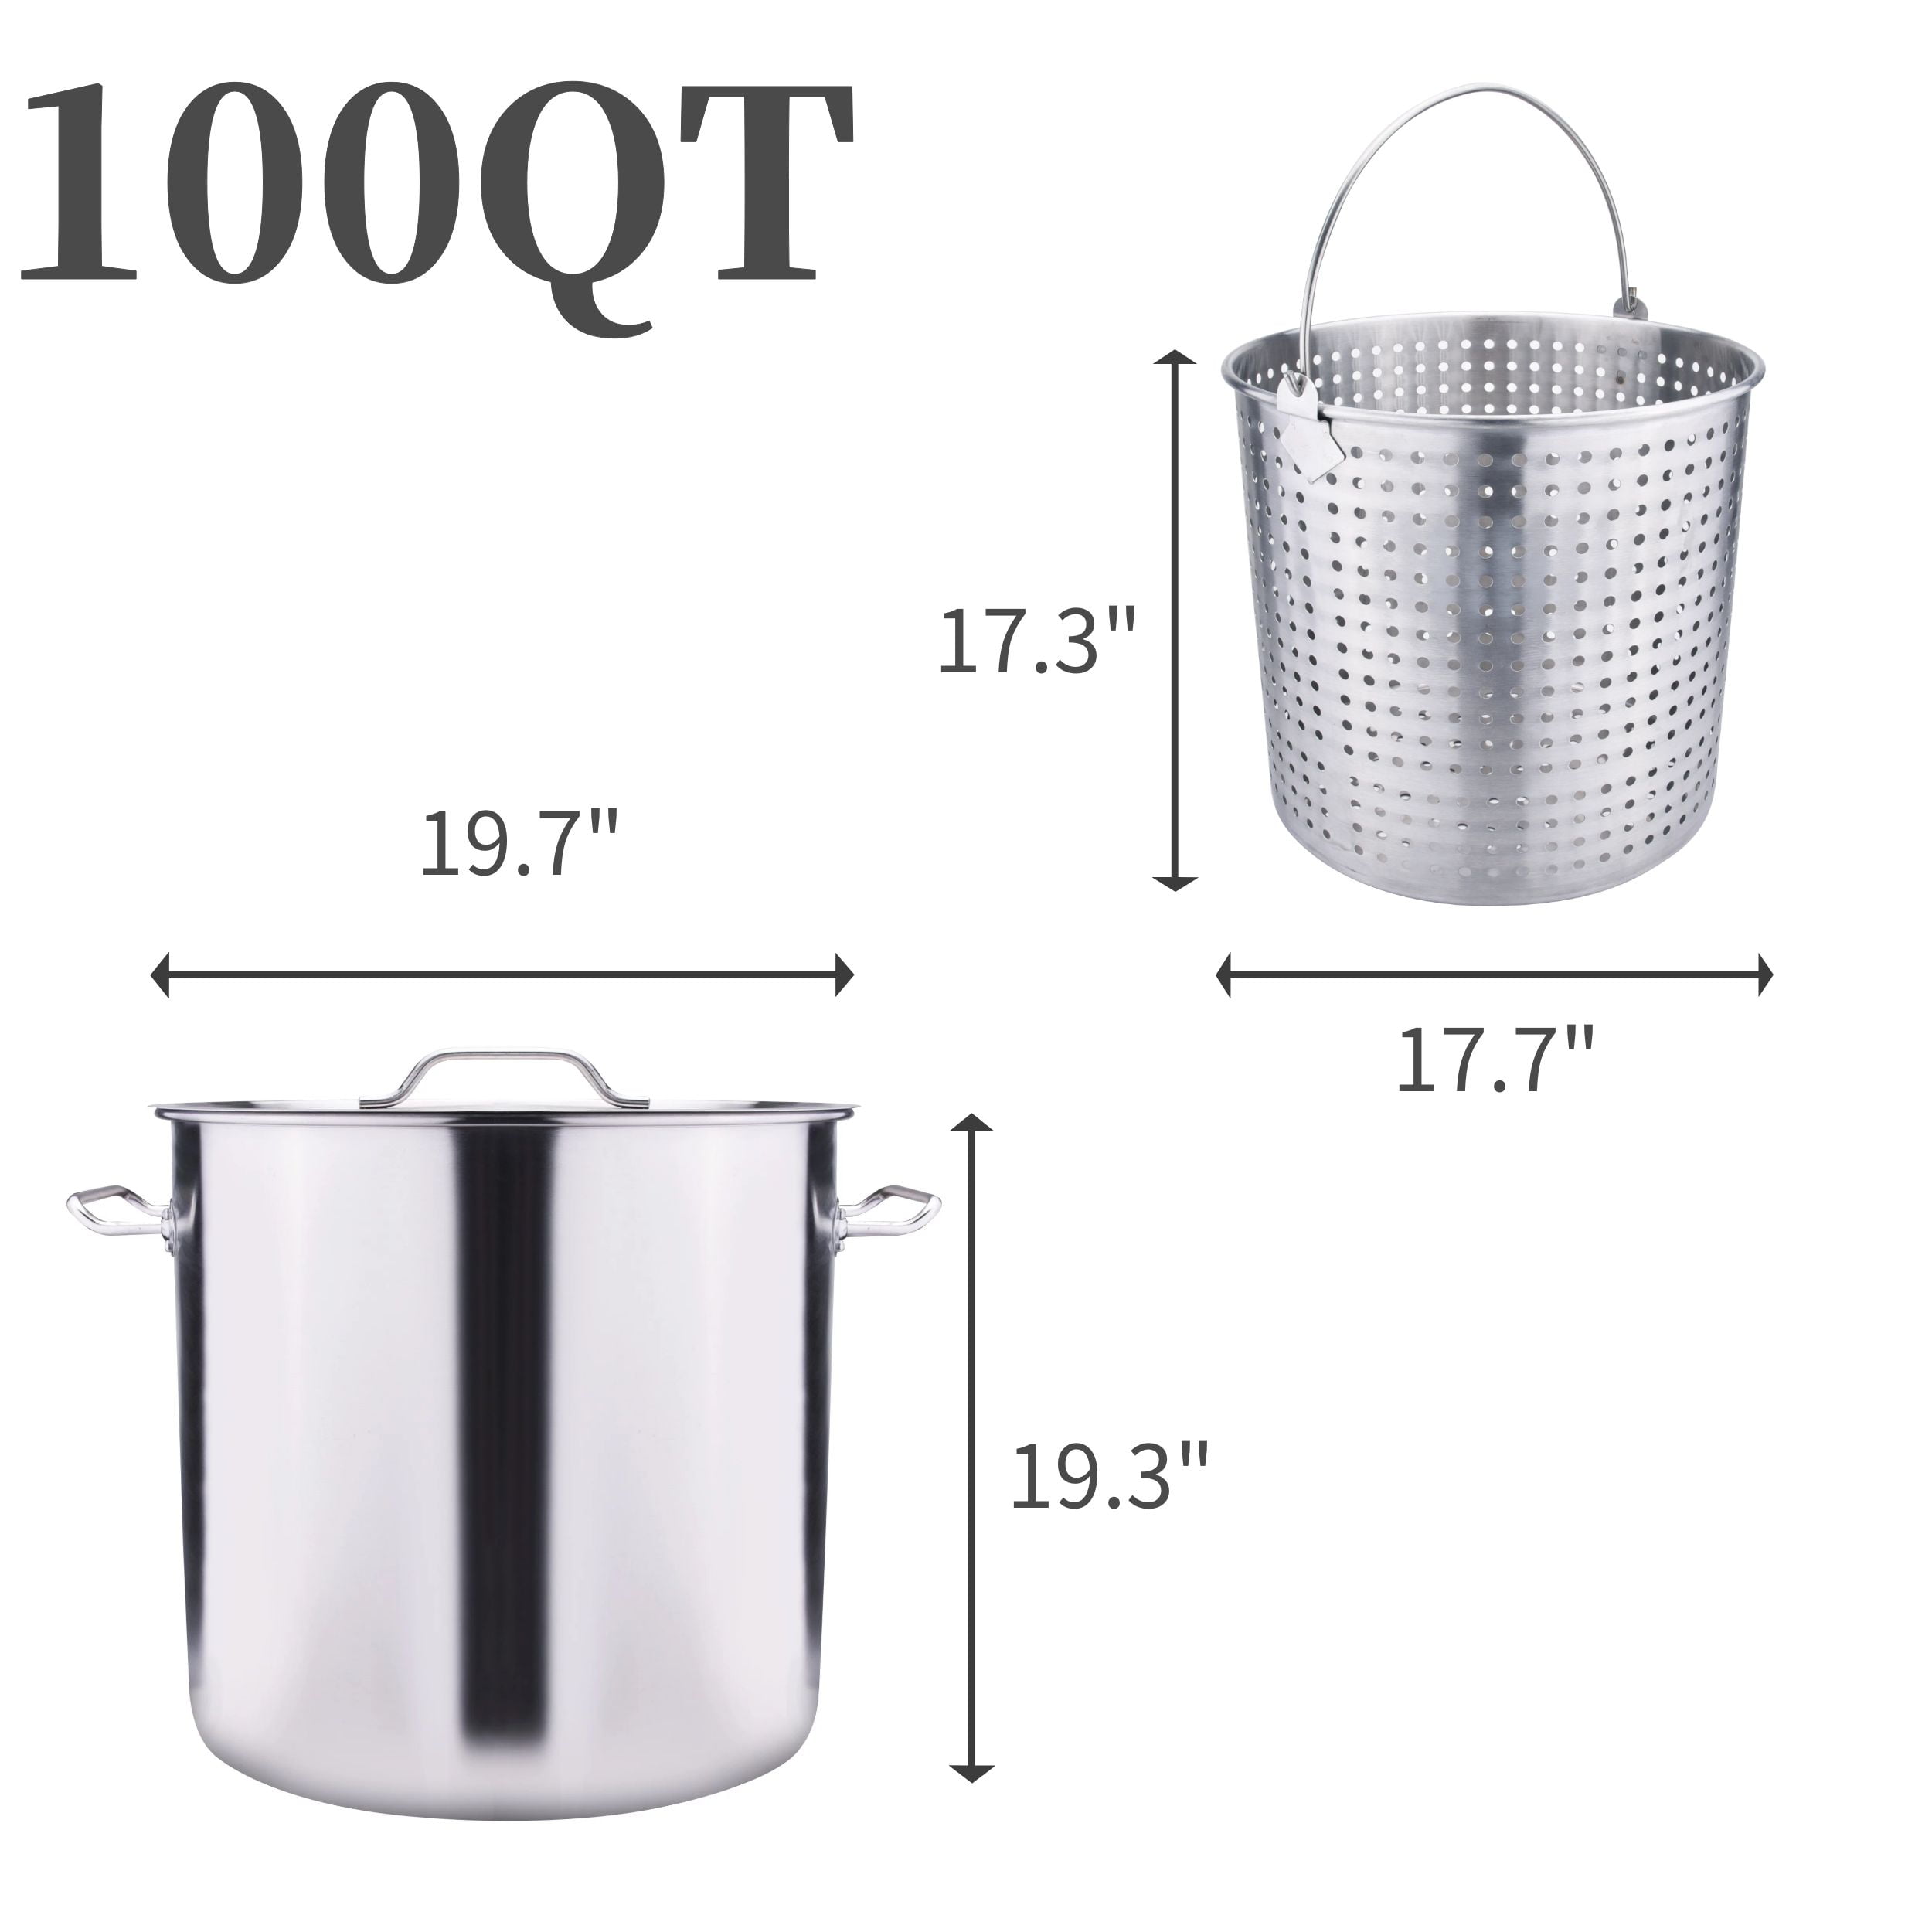 LWW Pot,Stainless Steel Stock Pot Home Brew Pot Cooking Pot,Large Cooking  Pot,Compound Bottom Three-Layer Steel,2525CM